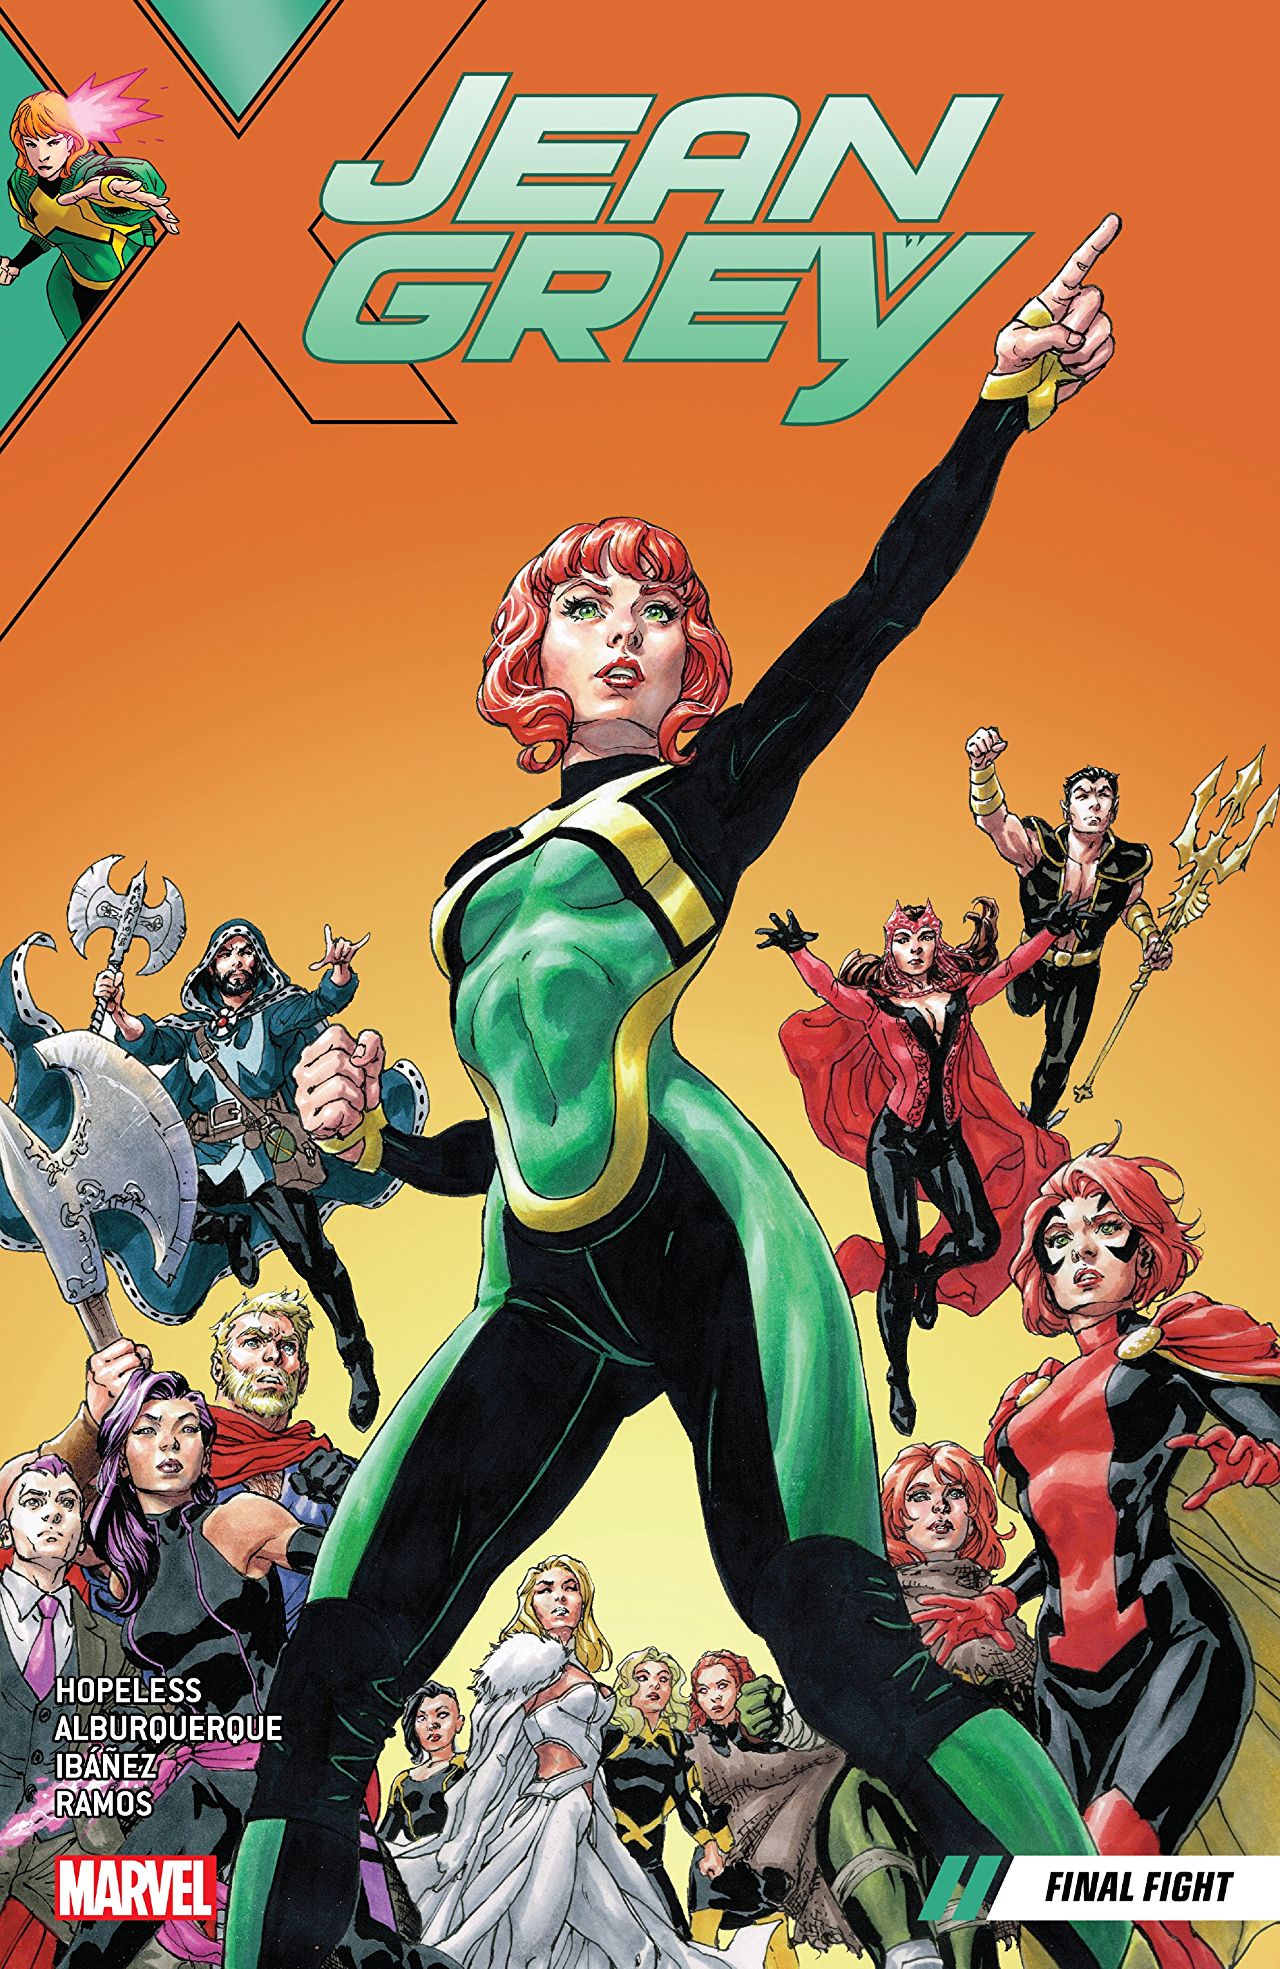 Jean Grey Vol. 2: Final Fight review: this capable, fiery, and passionate young Jean is a lot of fun